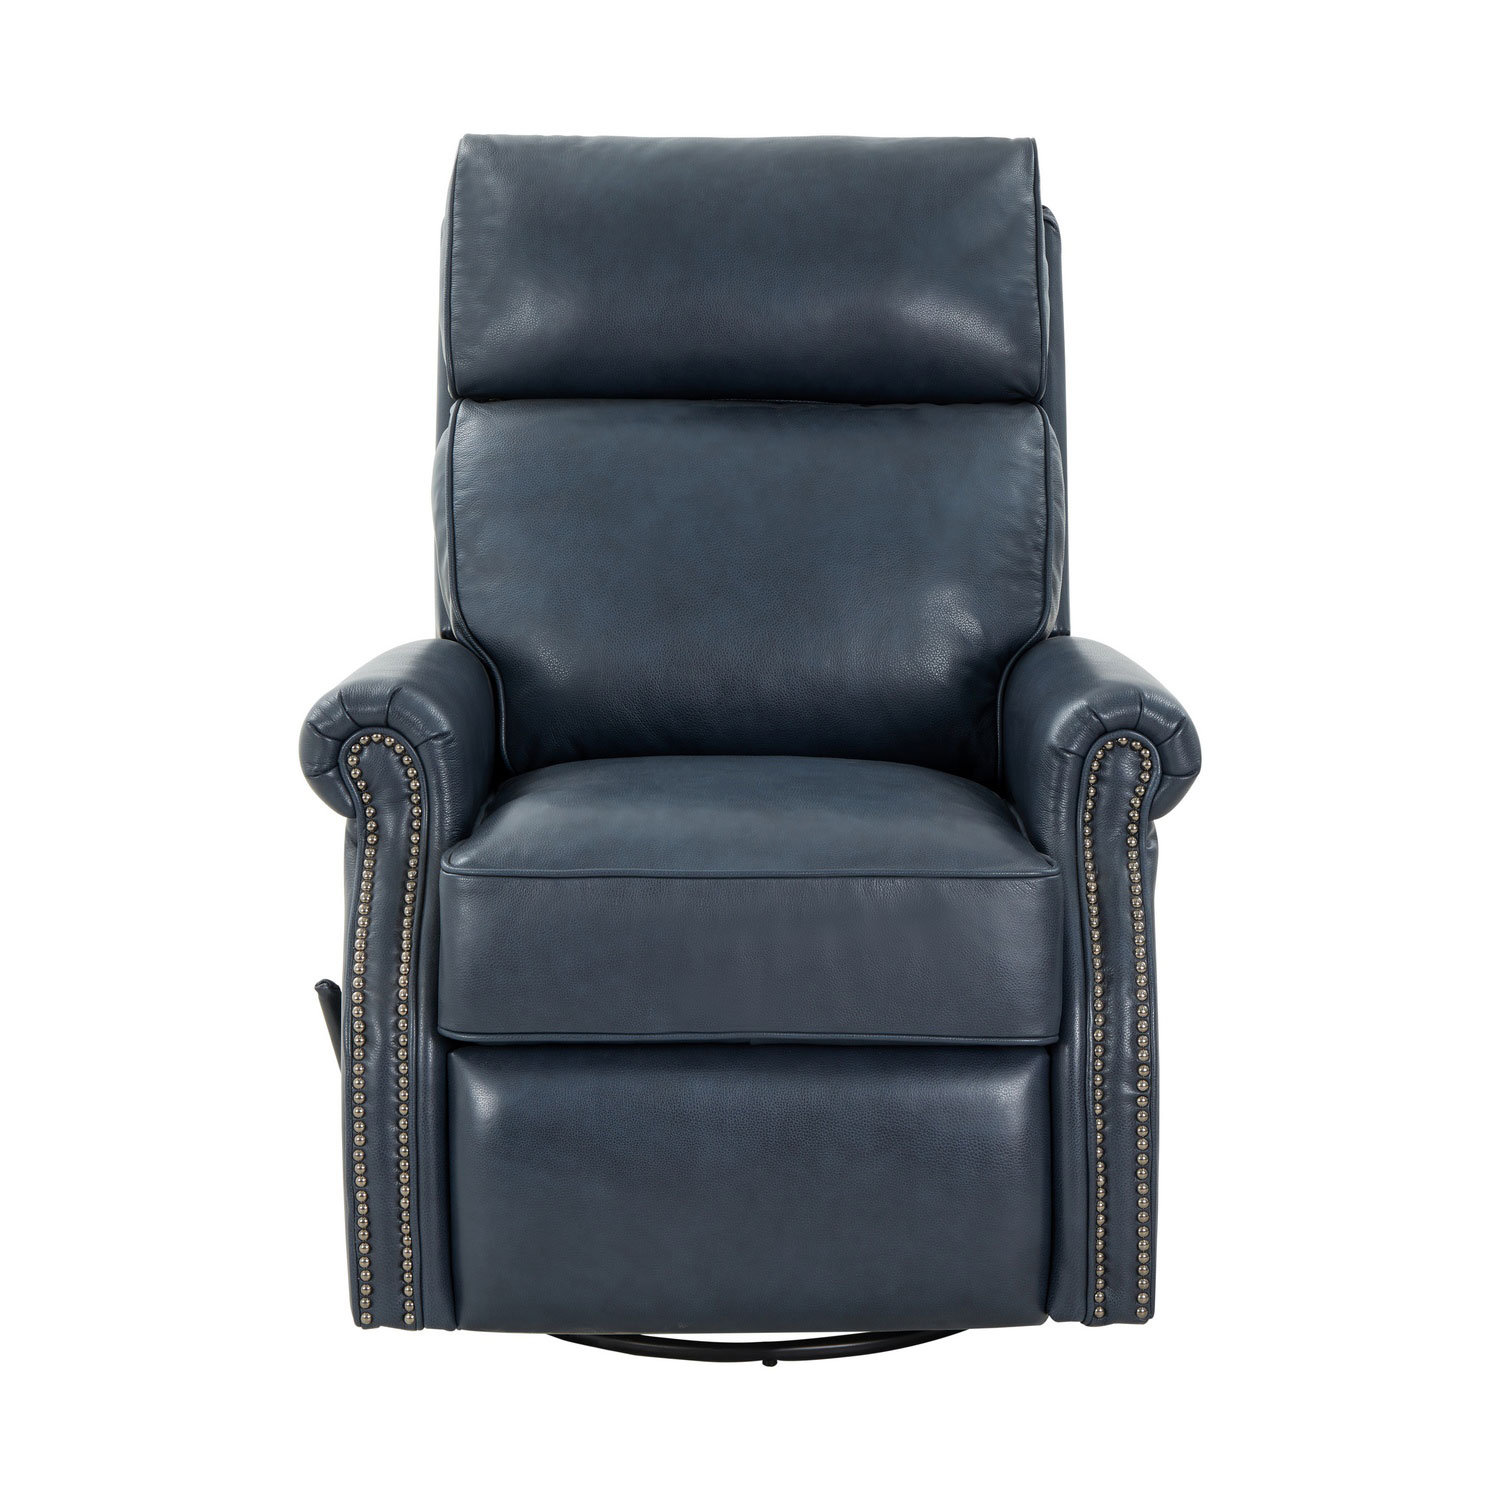 Barcalounger Crews Swivel Glider Recliner Chair - Barone Navy Blue/All Leather